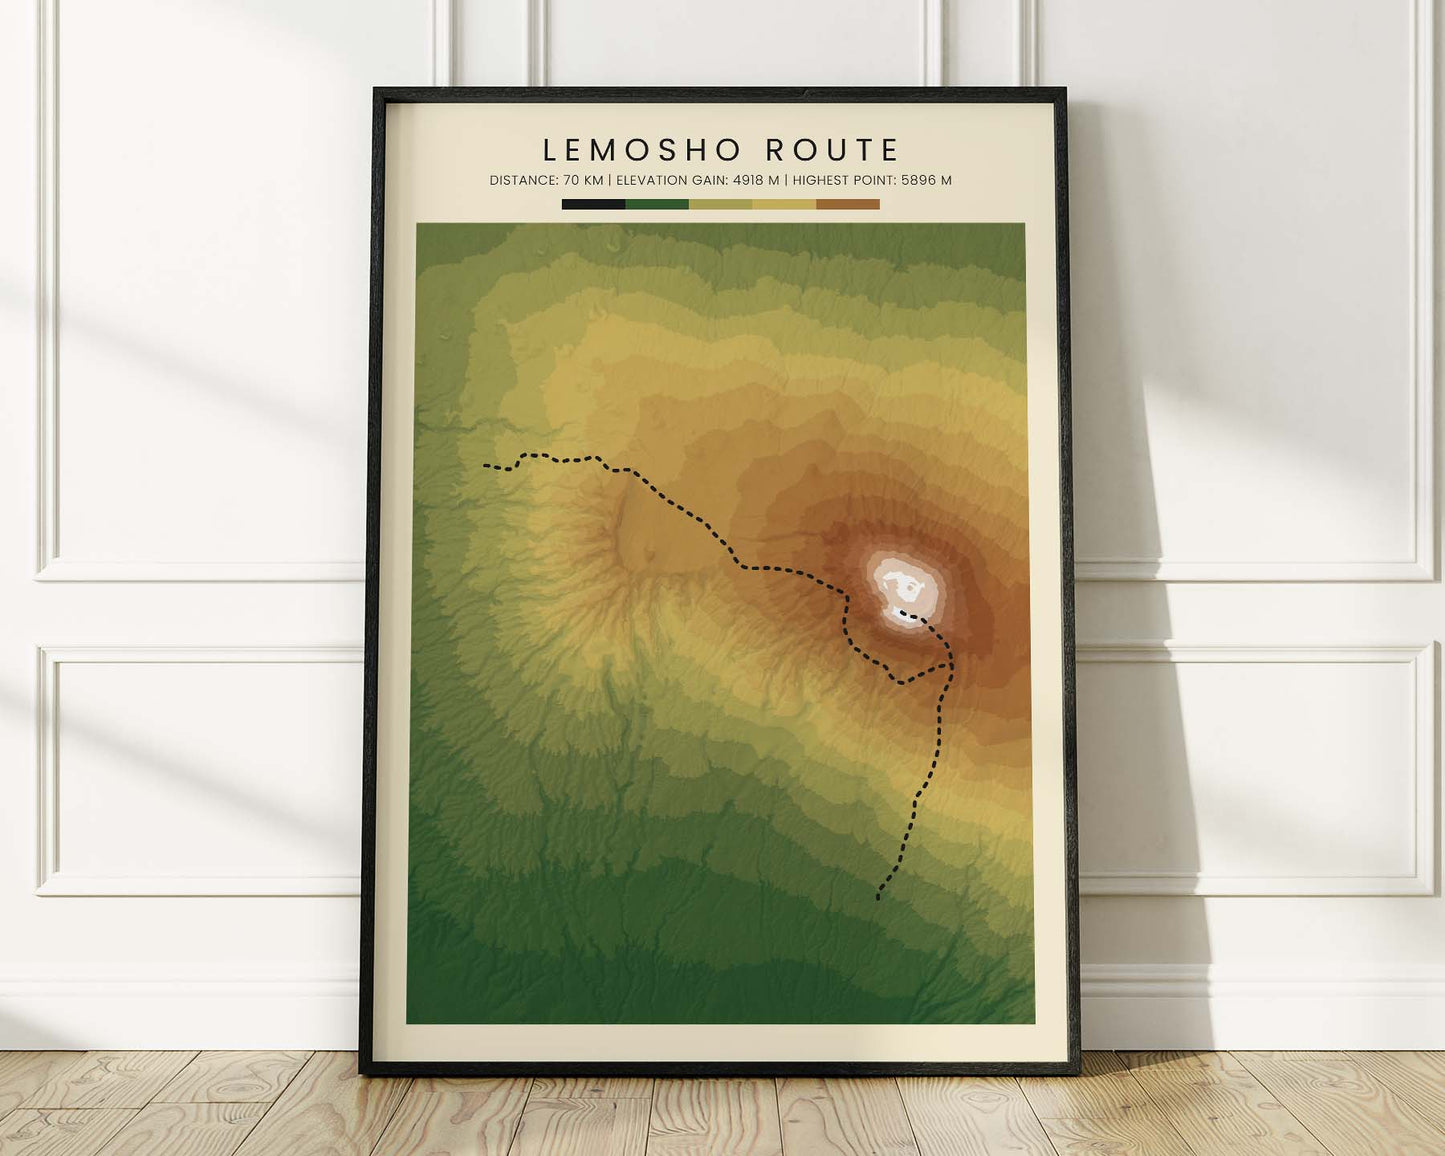 Lemosho Route (Tanzania) Hike Poster with Realistic Green Background